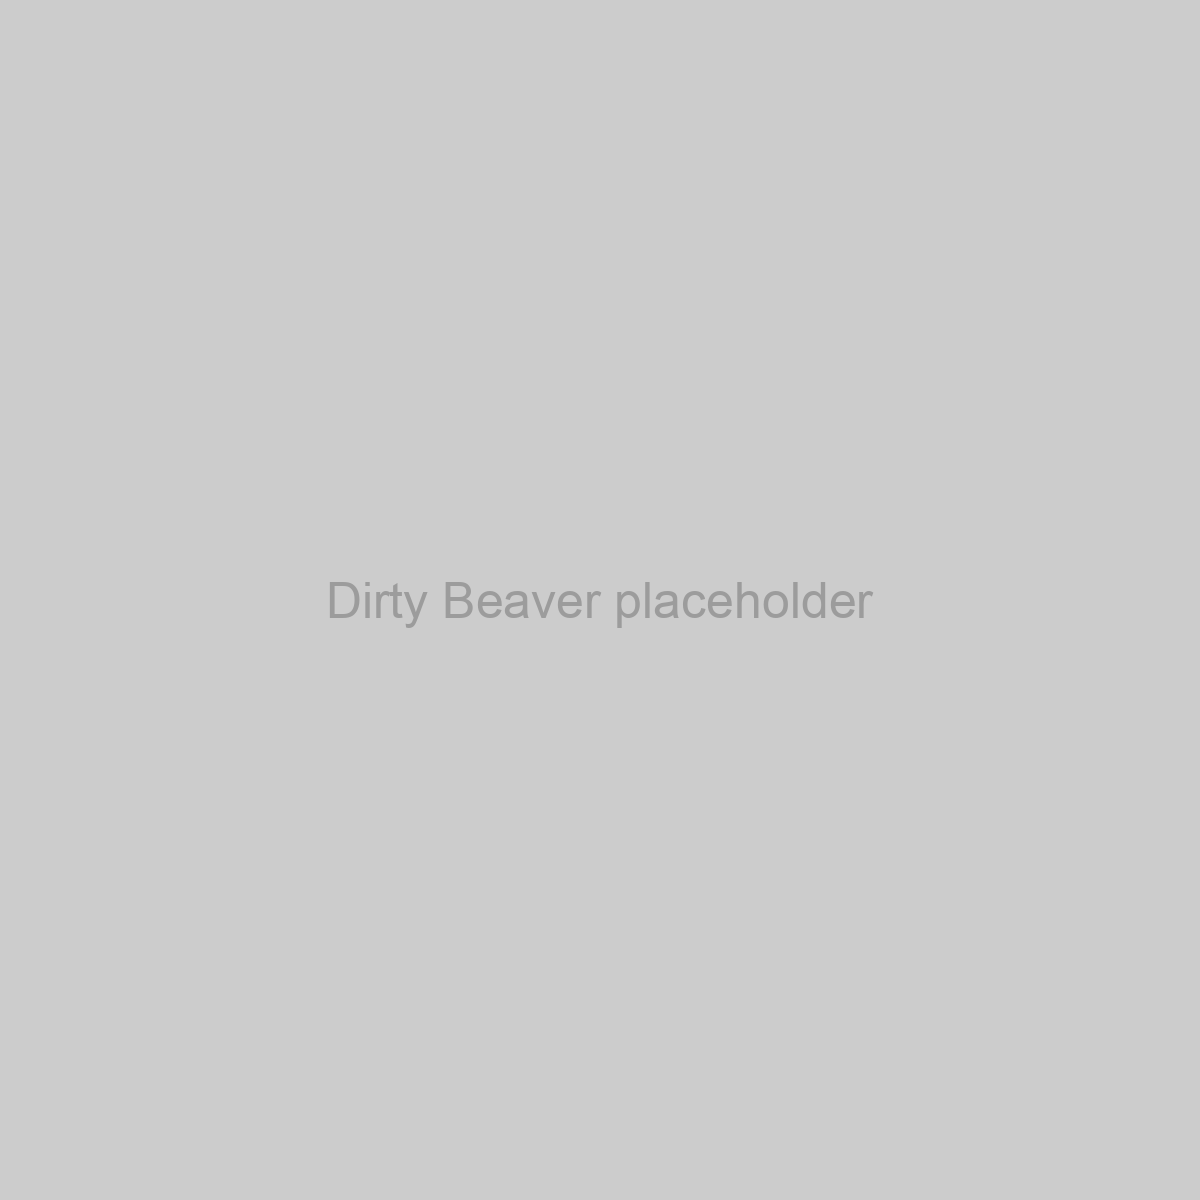 Dirty Beaver Placeholder Image